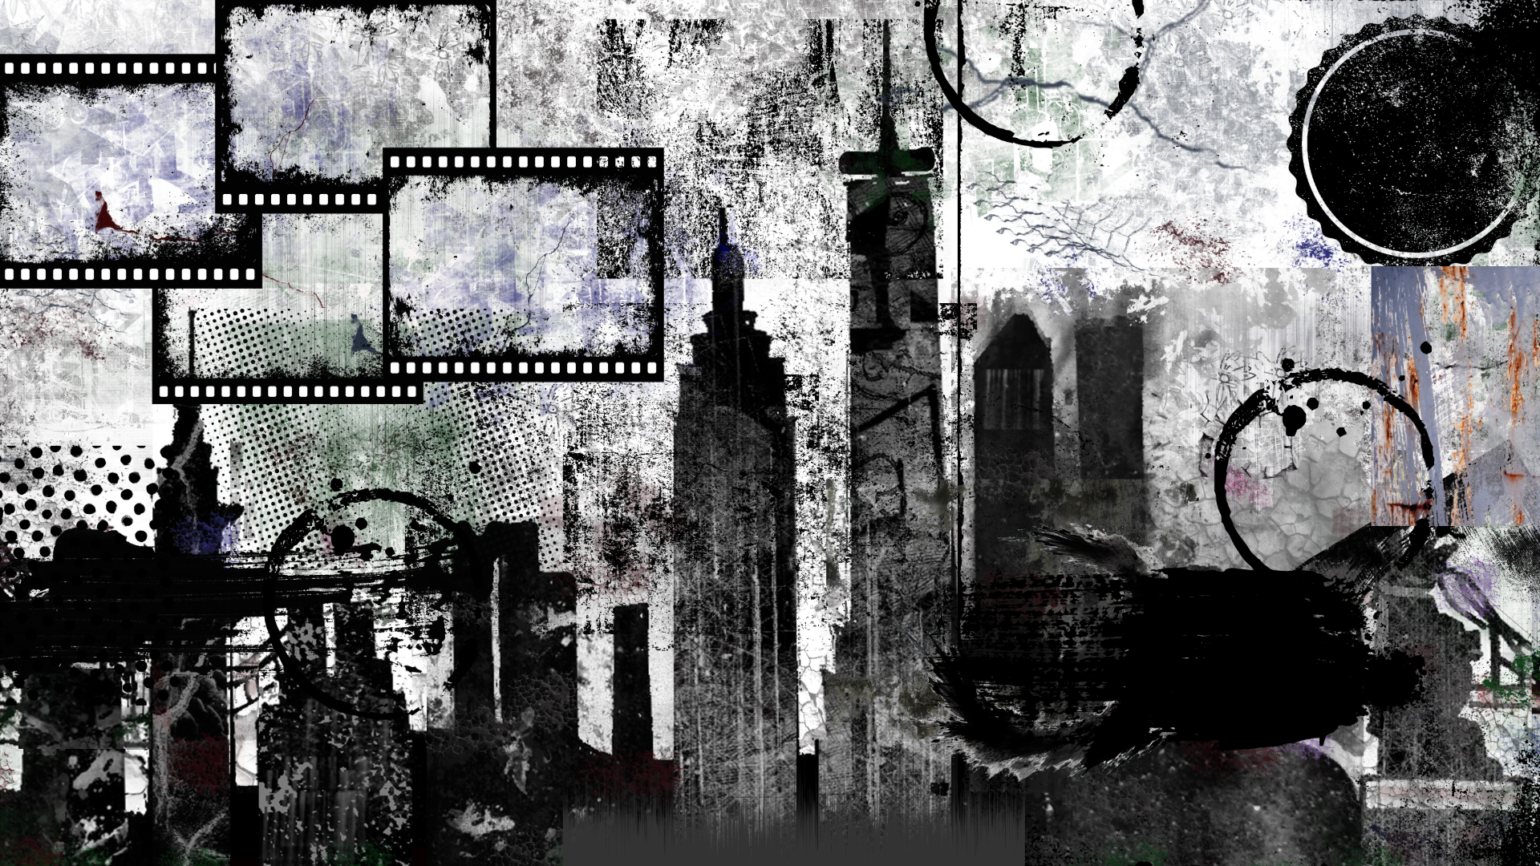 grunge design background with a black and gray NYC cityscape and grunge design elements in black.